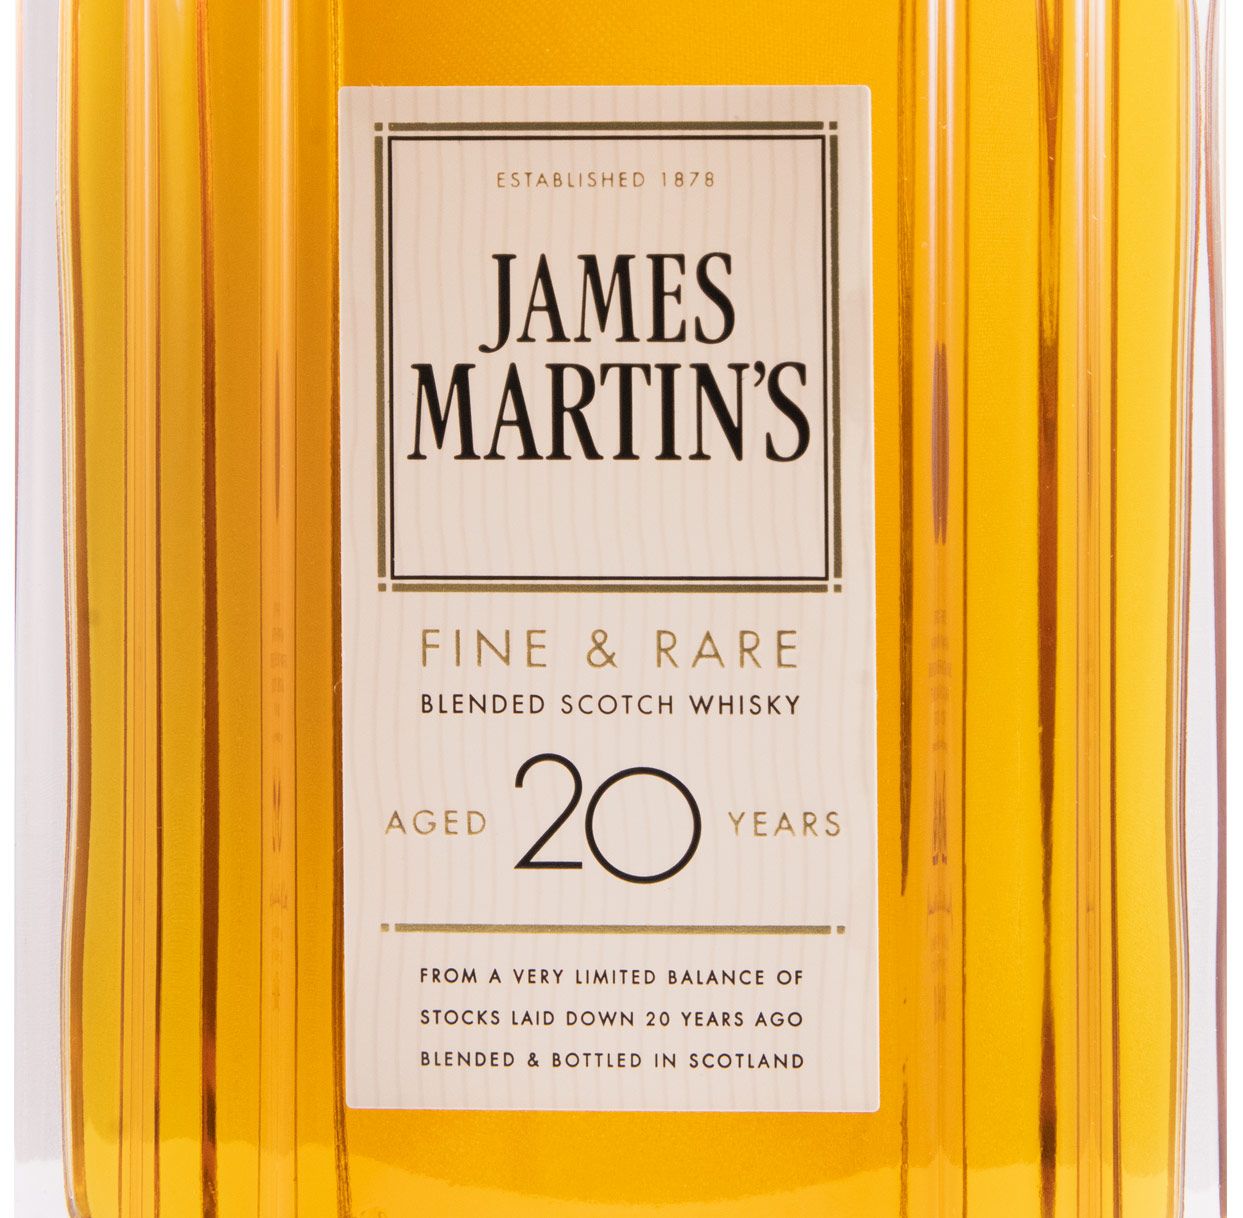 James Martin's 20 years with case